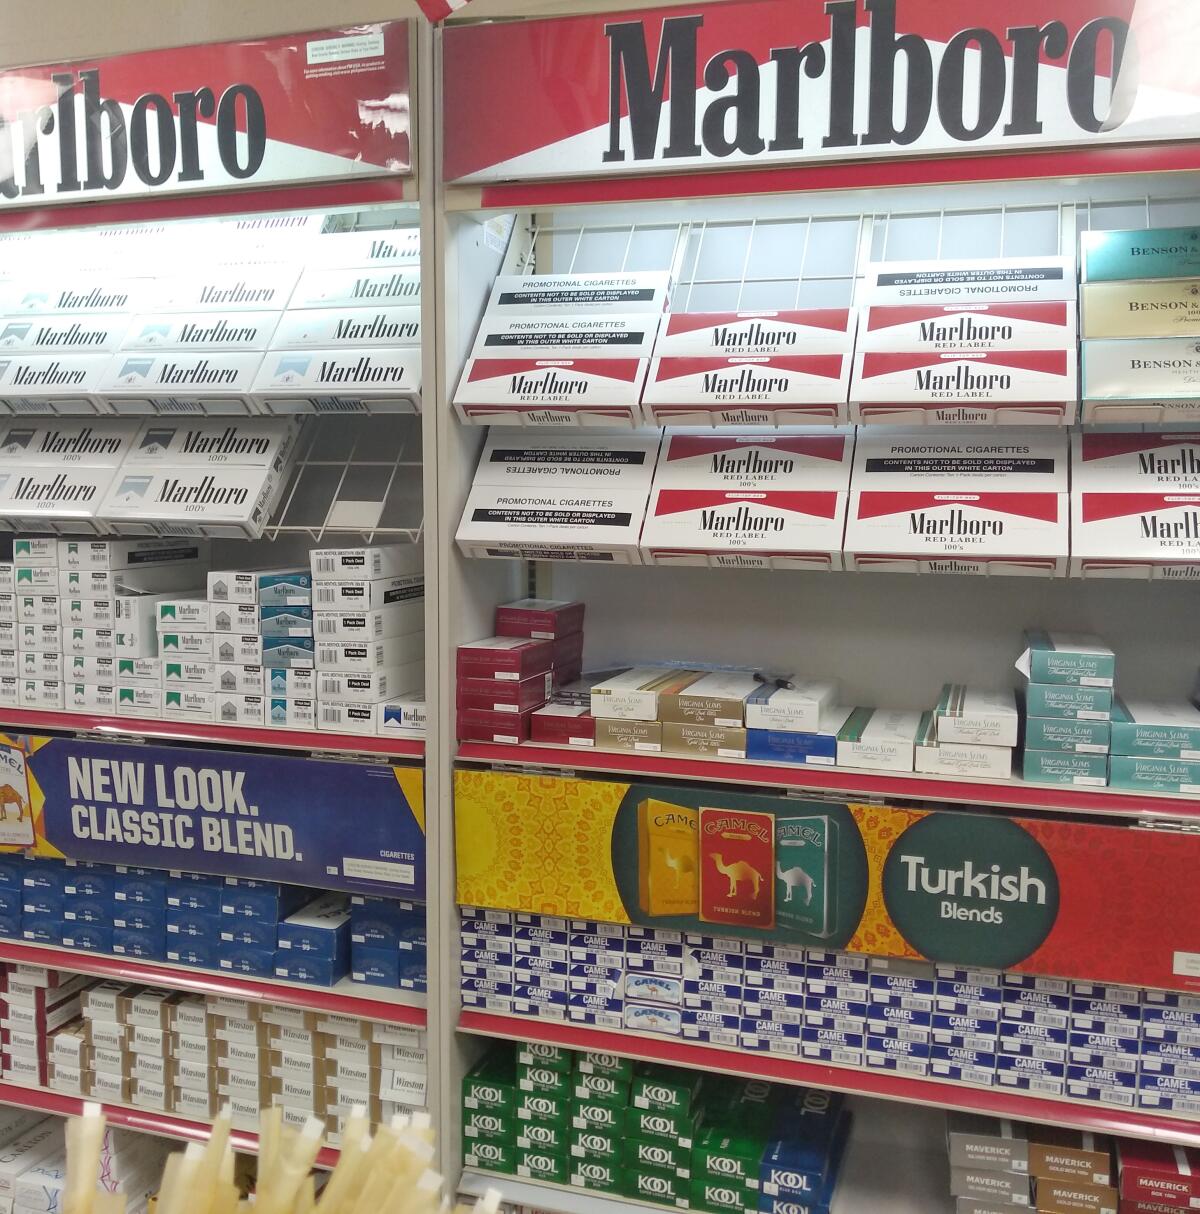 packs of cigarettes on sale